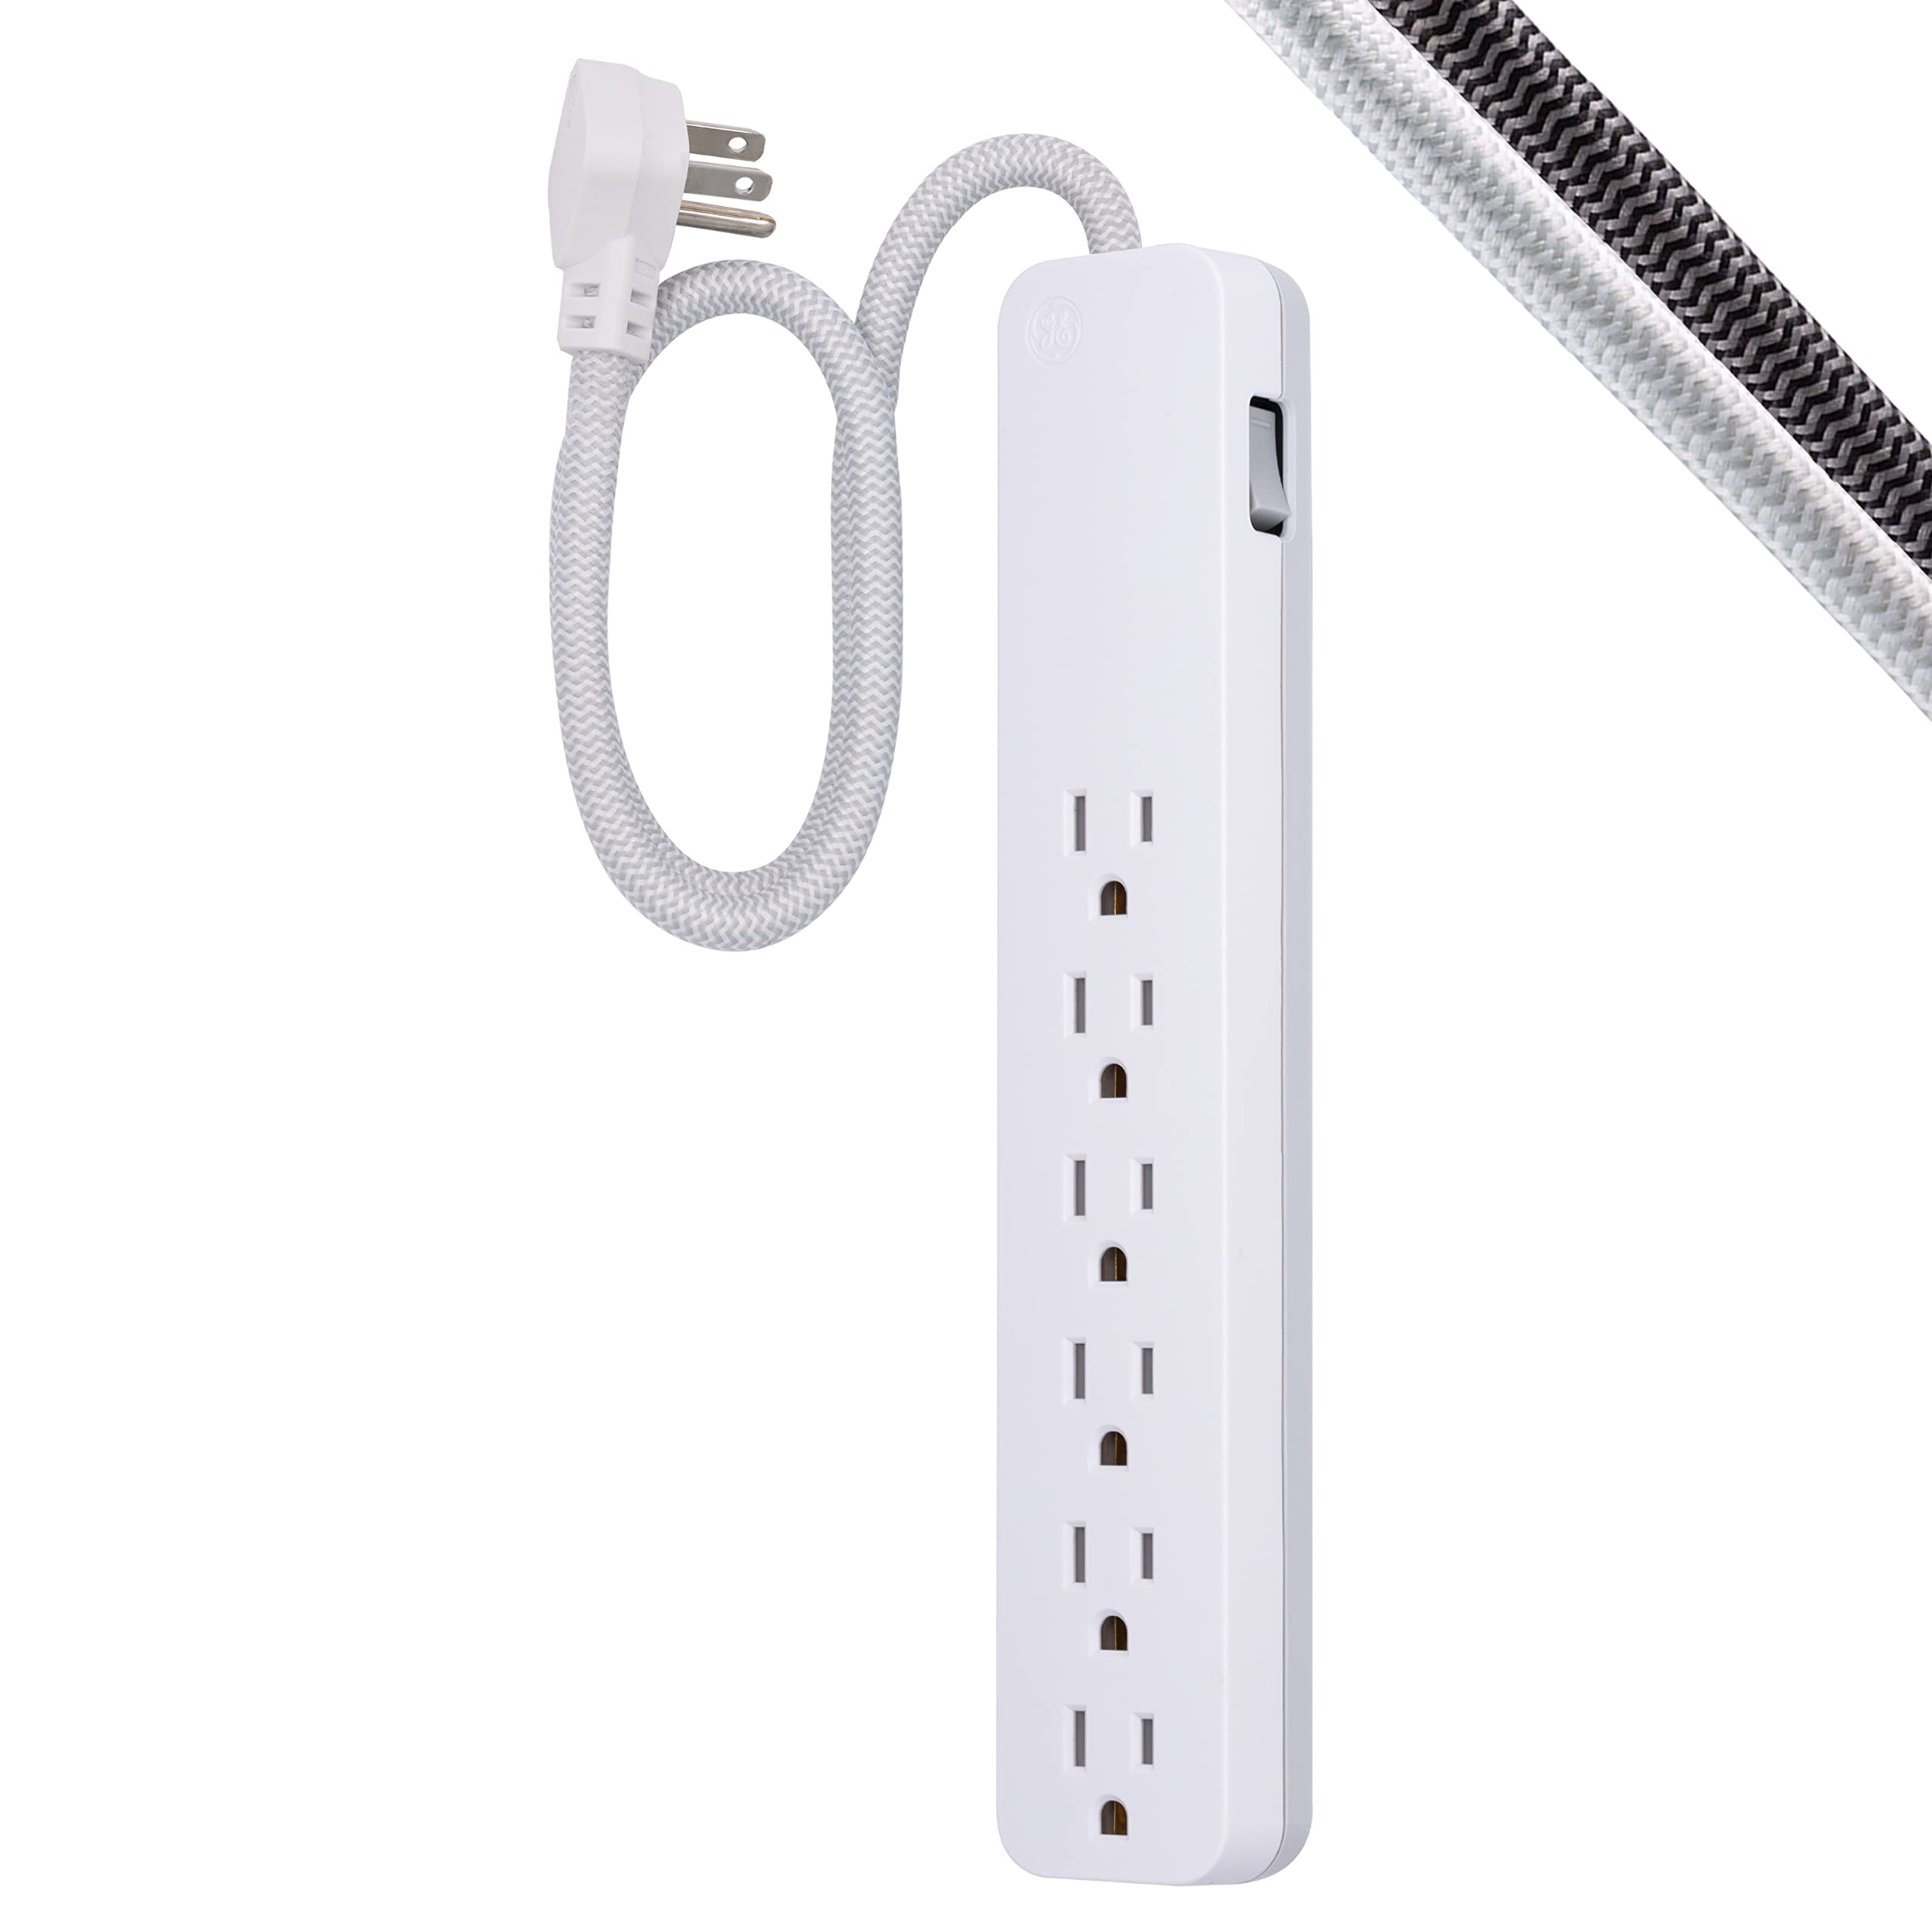 GE UltraPro 6-Outlet Surge Protector, 2 Ft Designer Braided Extension Cord, 560 Joules, Flat Plug, Wall Mount, UL Listed, White, 45264